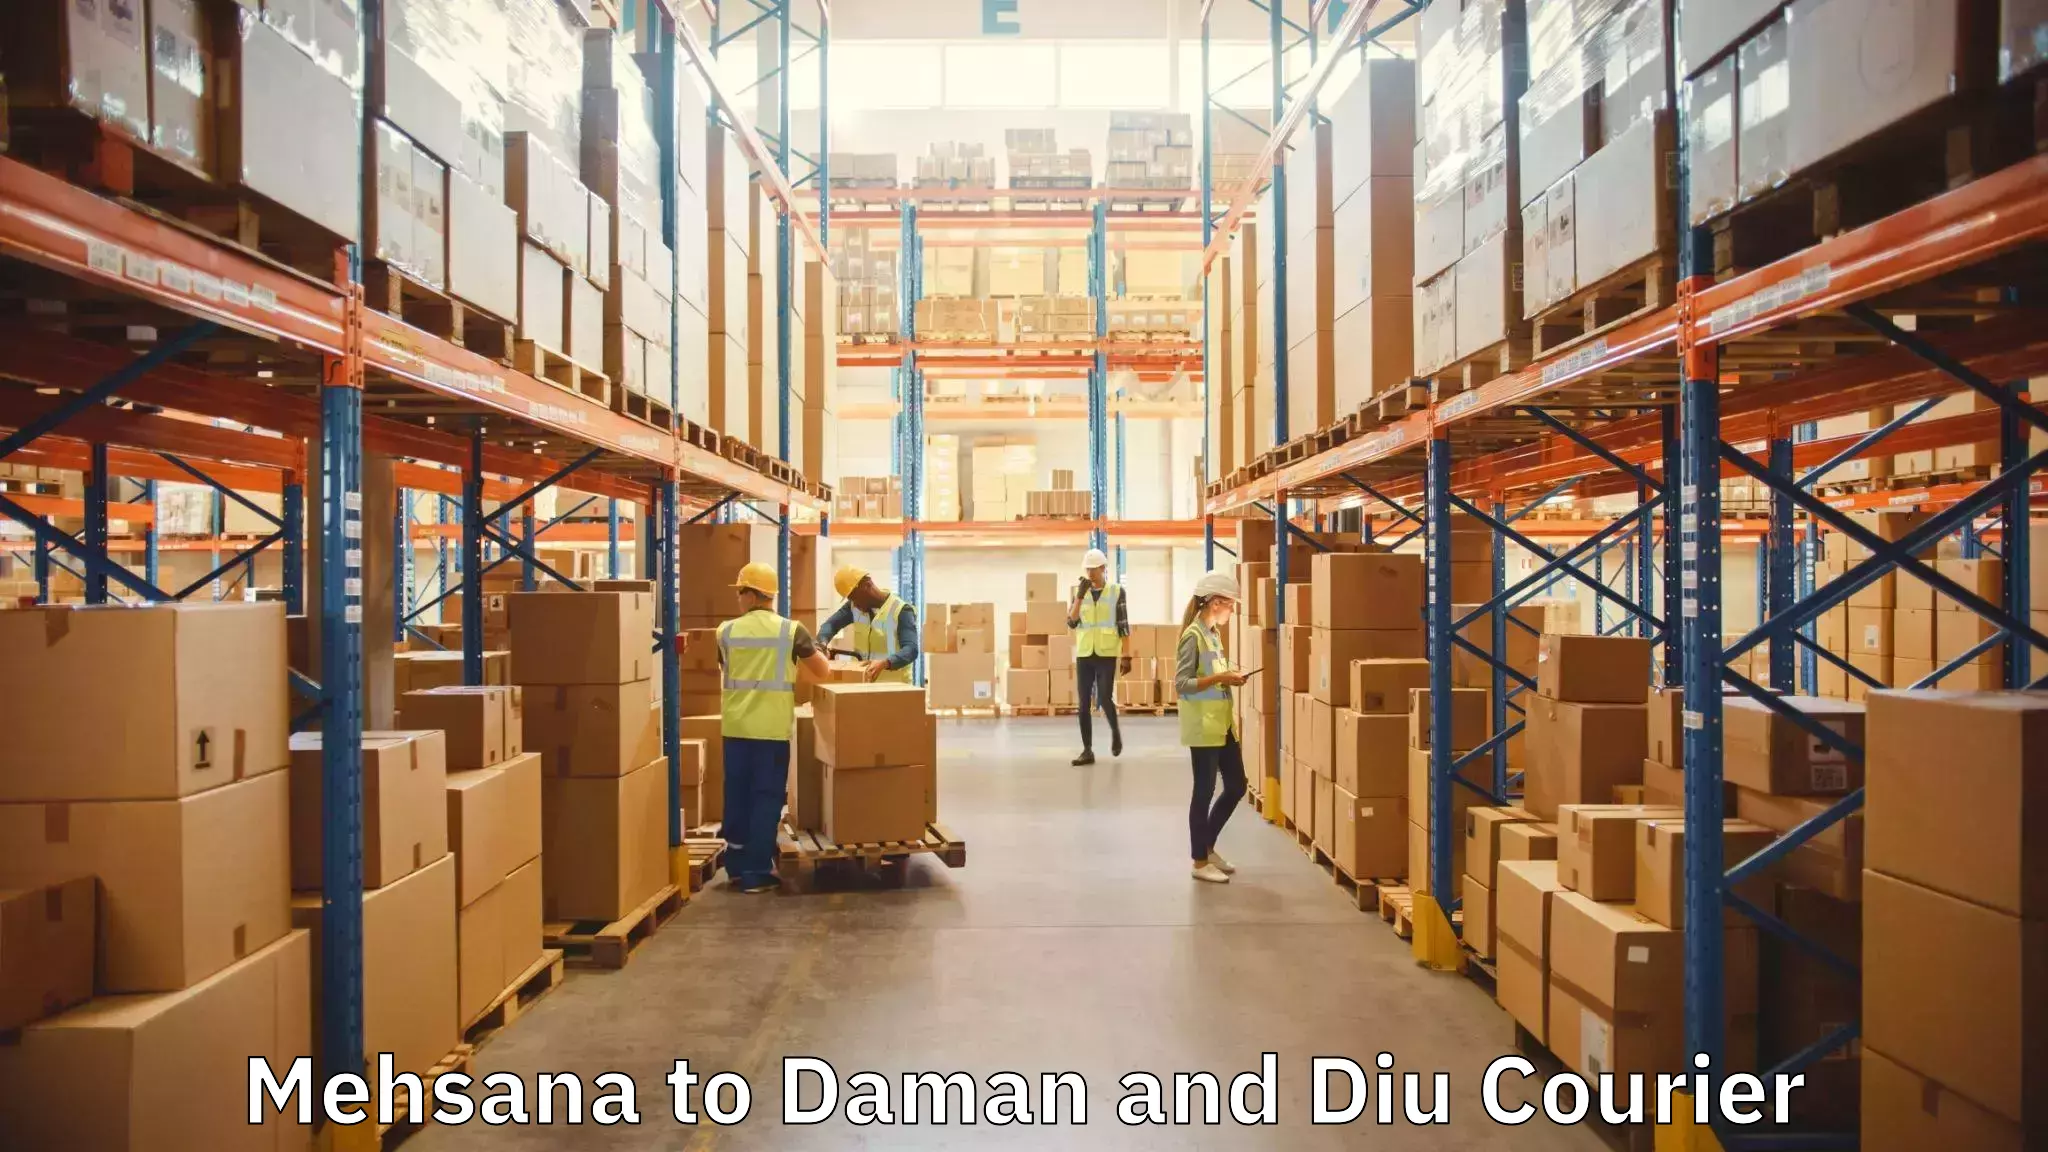 Furniture relocation experts Mehsana to Daman and Diu